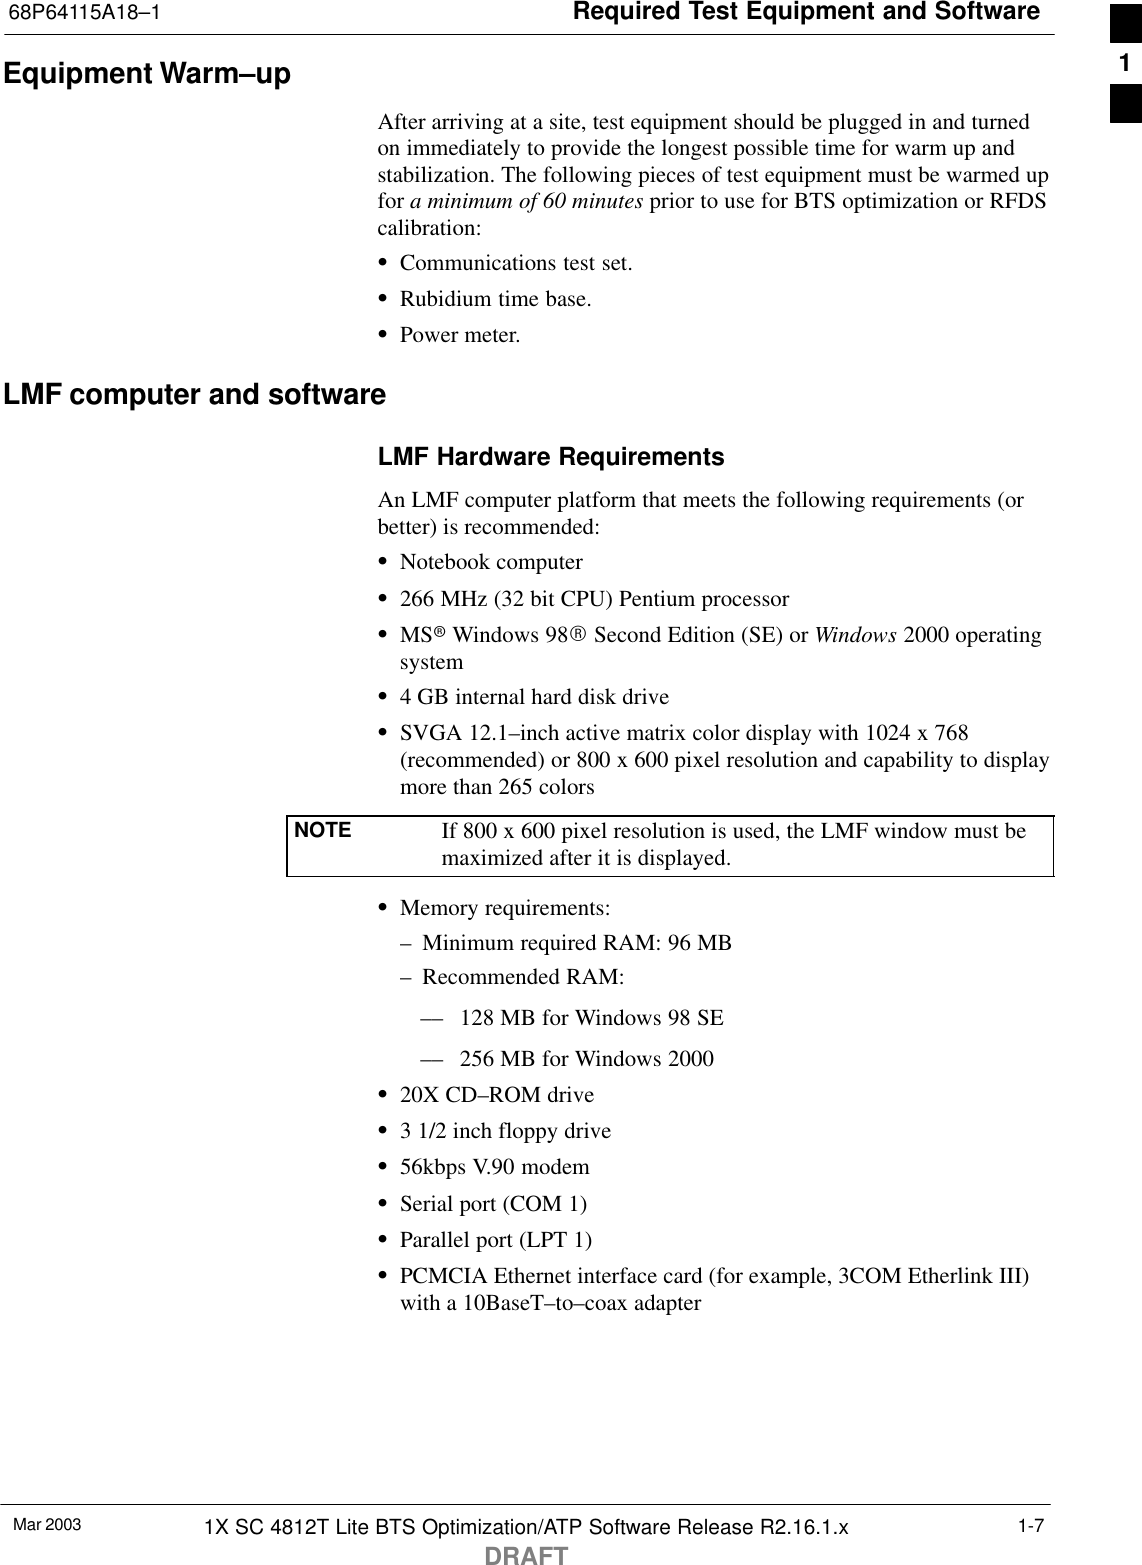 Required Test Equipment and Software68P64115A18–1Mar 2003 1X SC 4812T Lite BTS Optimization/ATP Software Release R2.16.1.xDRAFT1-7Equipment Warm–upAfter arriving at a site, test equipment should be plugged in and turnedon immediately to provide the longest possible time for warm up andstabilization. The following pieces of test equipment must be warmed upfor a minimum of 60 minutes prior to use for BTS optimization or RFDScalibration:SCommunications test set.SRubidium time base.SPower meter.LMF computer and softwareLMF Hardware RequirementsAn LMF computer platform that meets the following requirements (orbetter) is recommended:SNotebook computerS266 MHz (32 bit CPU) Pentium processorSMSr Windows 98R Second Edition (SE) or Windows 2000 operatingsystemS4 GB internal hard disk driveSSVGA 12.1–inch active matrix color display with 1024 x 768(recommended) or 800 x 600 pixel resolution and capability to displaymore than 265 colorsNOTE If 800 x 600 pixel resolution is used, the LMF window must bemaximized after it is displayed.SMemory requirements:– Minimum required RAM: 96 MB– Recommended RAM:–– 128 MB for Windows 98 SE–– 256 MB for Windows 2000S20X CD–ROM driveS3 1/2 inch floppy driveS56kbps V.90 modemSSerial port (COM 1)SParallel port (LPT 1)SPCMCIA Ethernet interface card (for example, 3COM Etherlink III)with a 10BaseT–to–coax adapter1